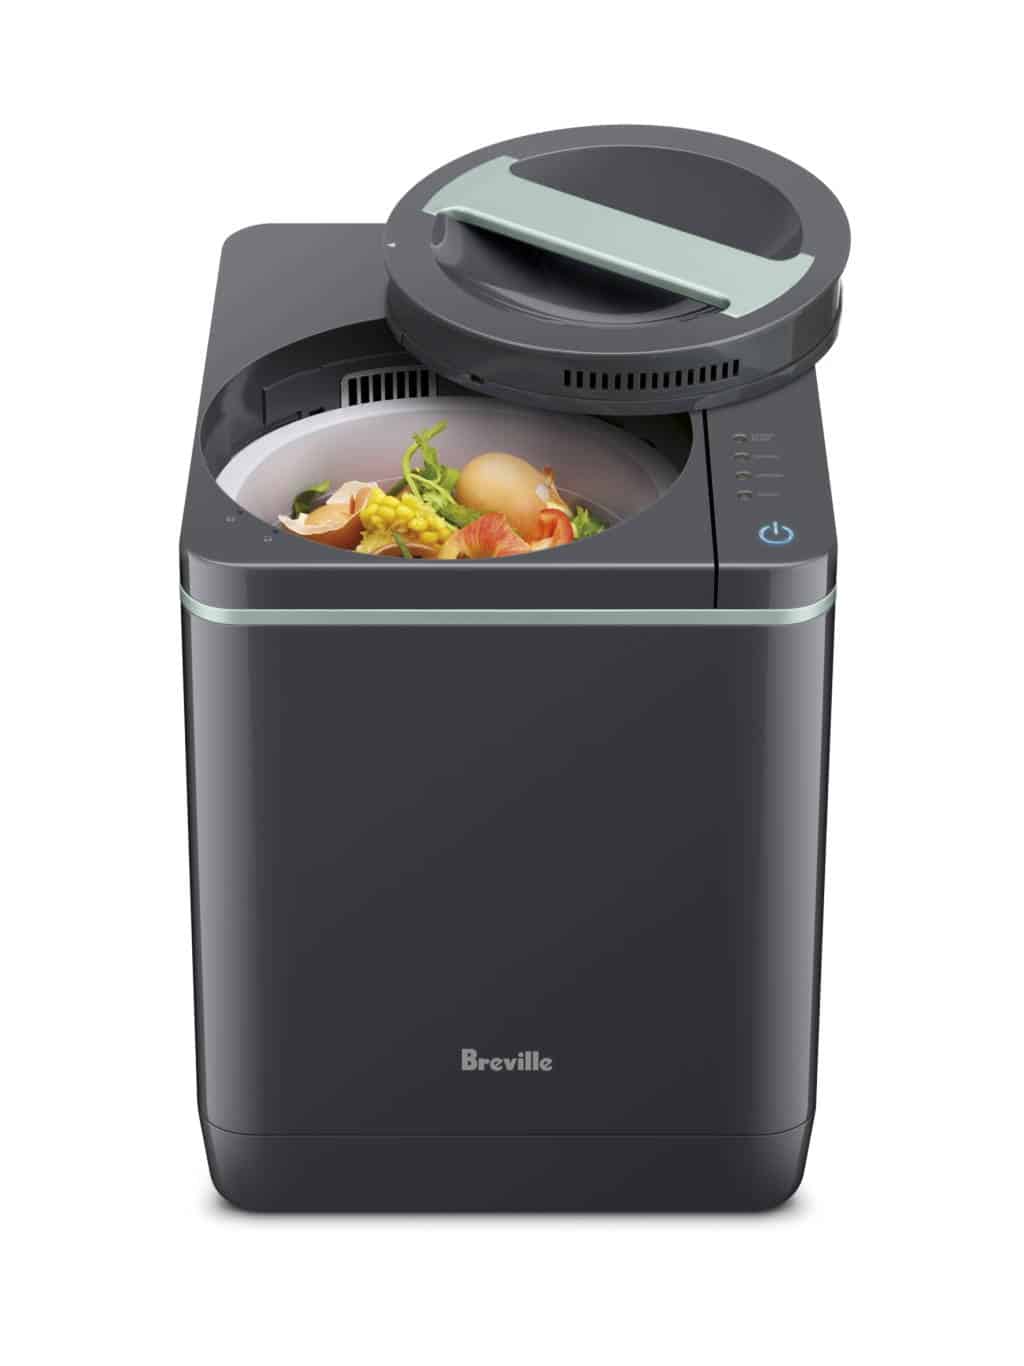 Breville FoodCycler review